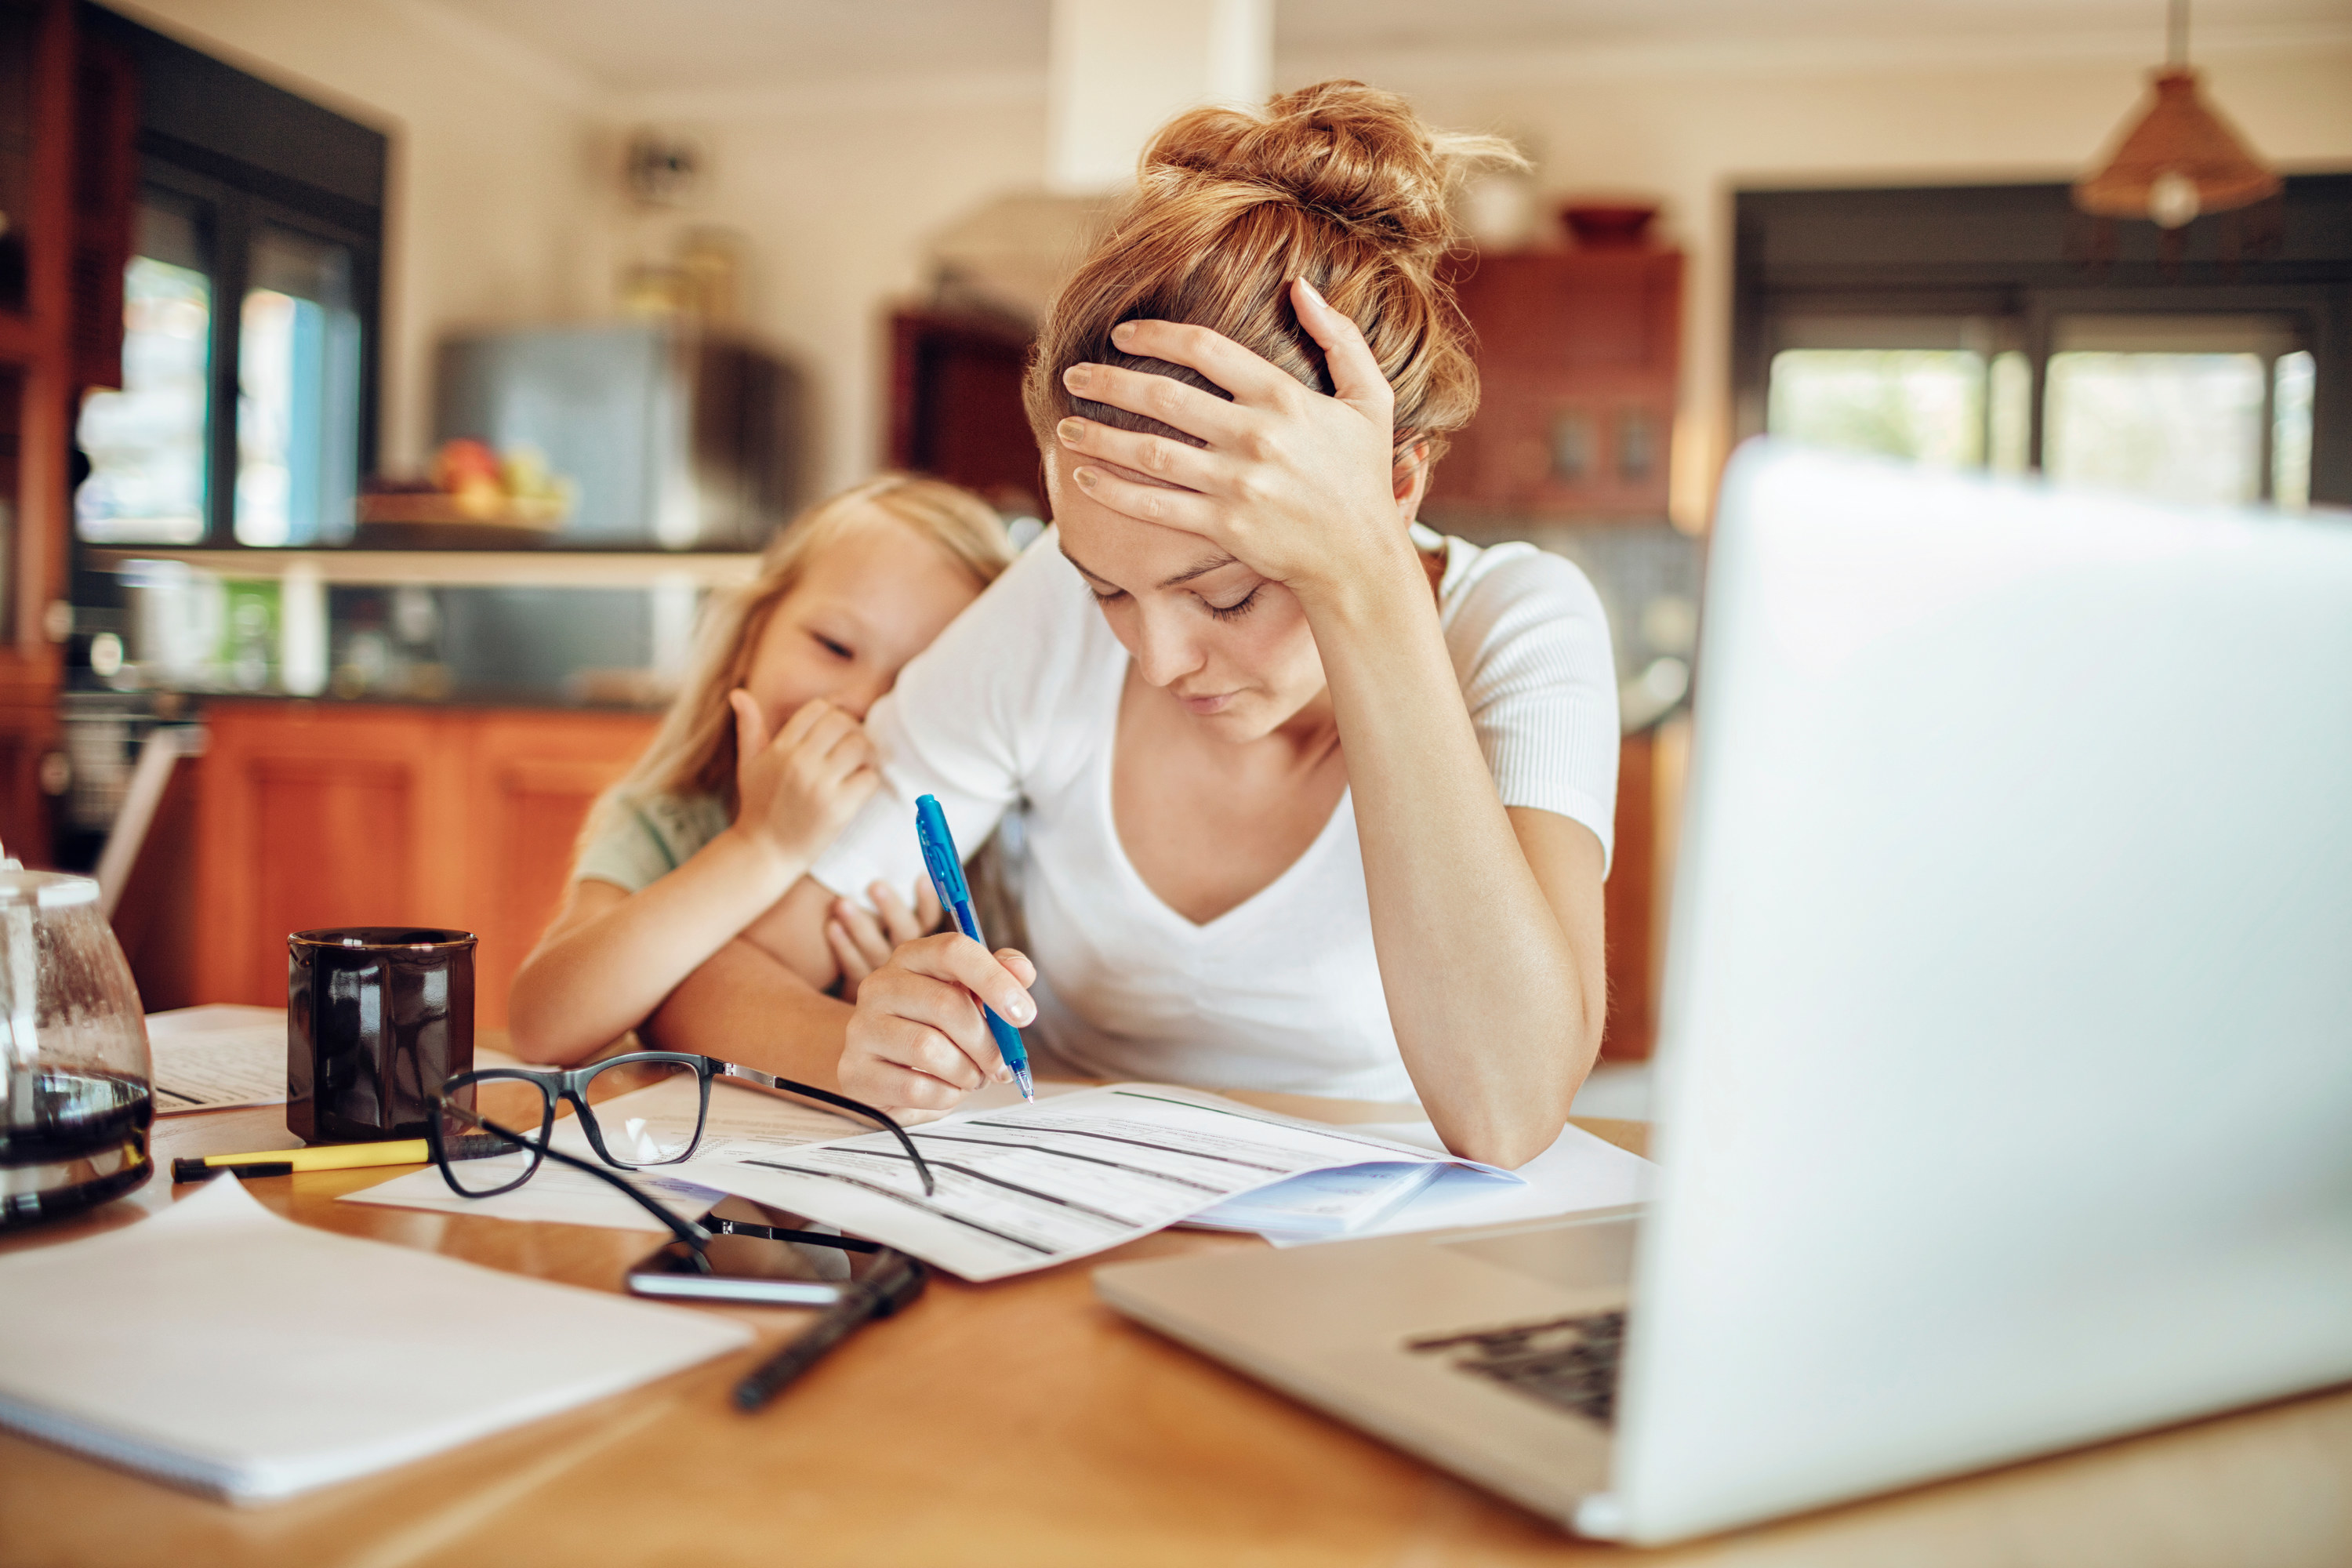 A woman grows frustrated while her daughter distracts her from work